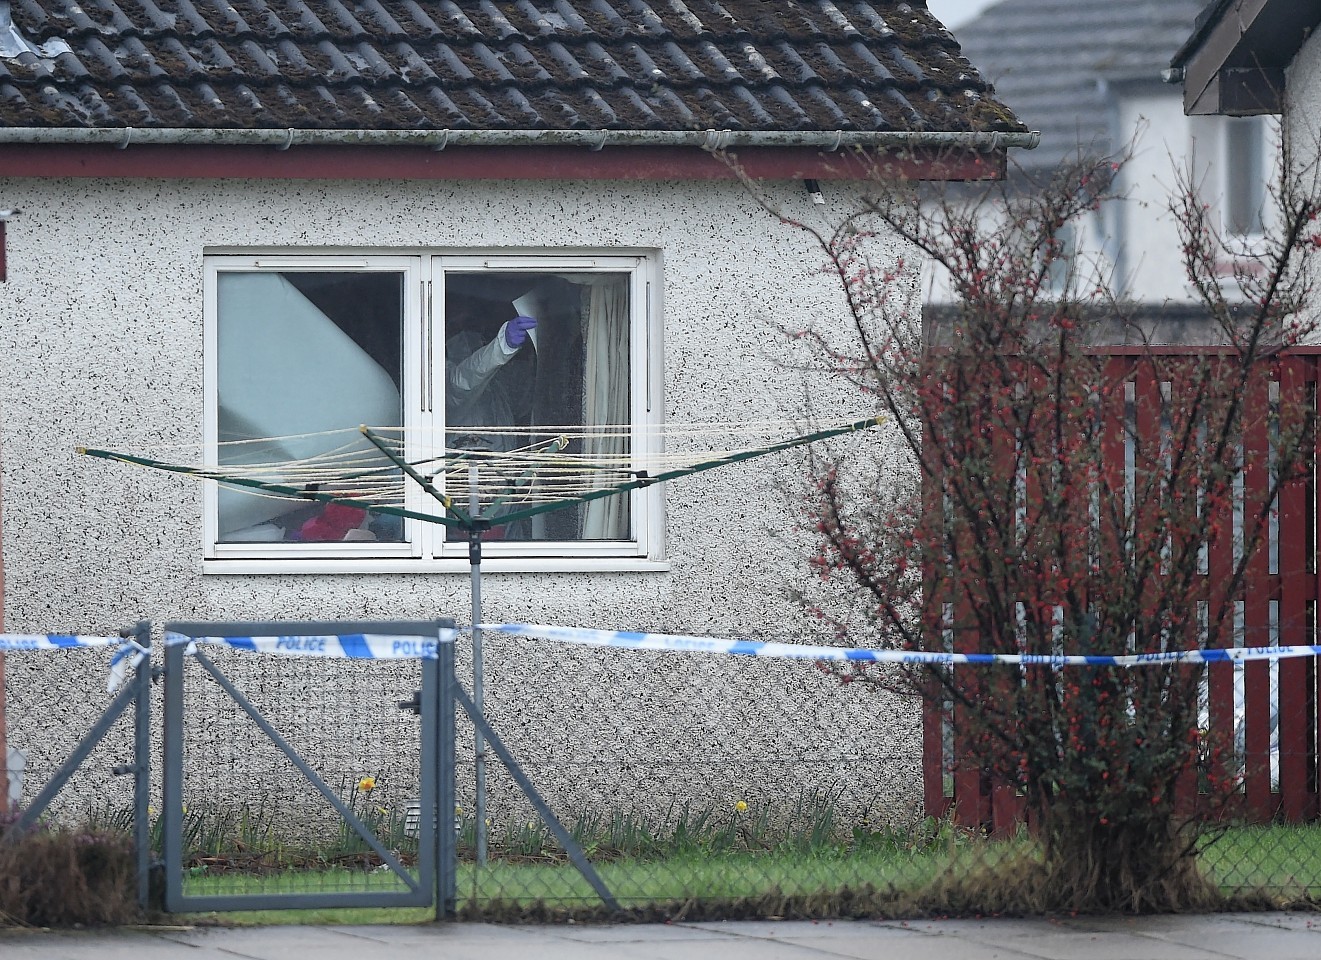 Forensic officers at work in the home of Elizabeth Mackay in Kintail Court, Inverness